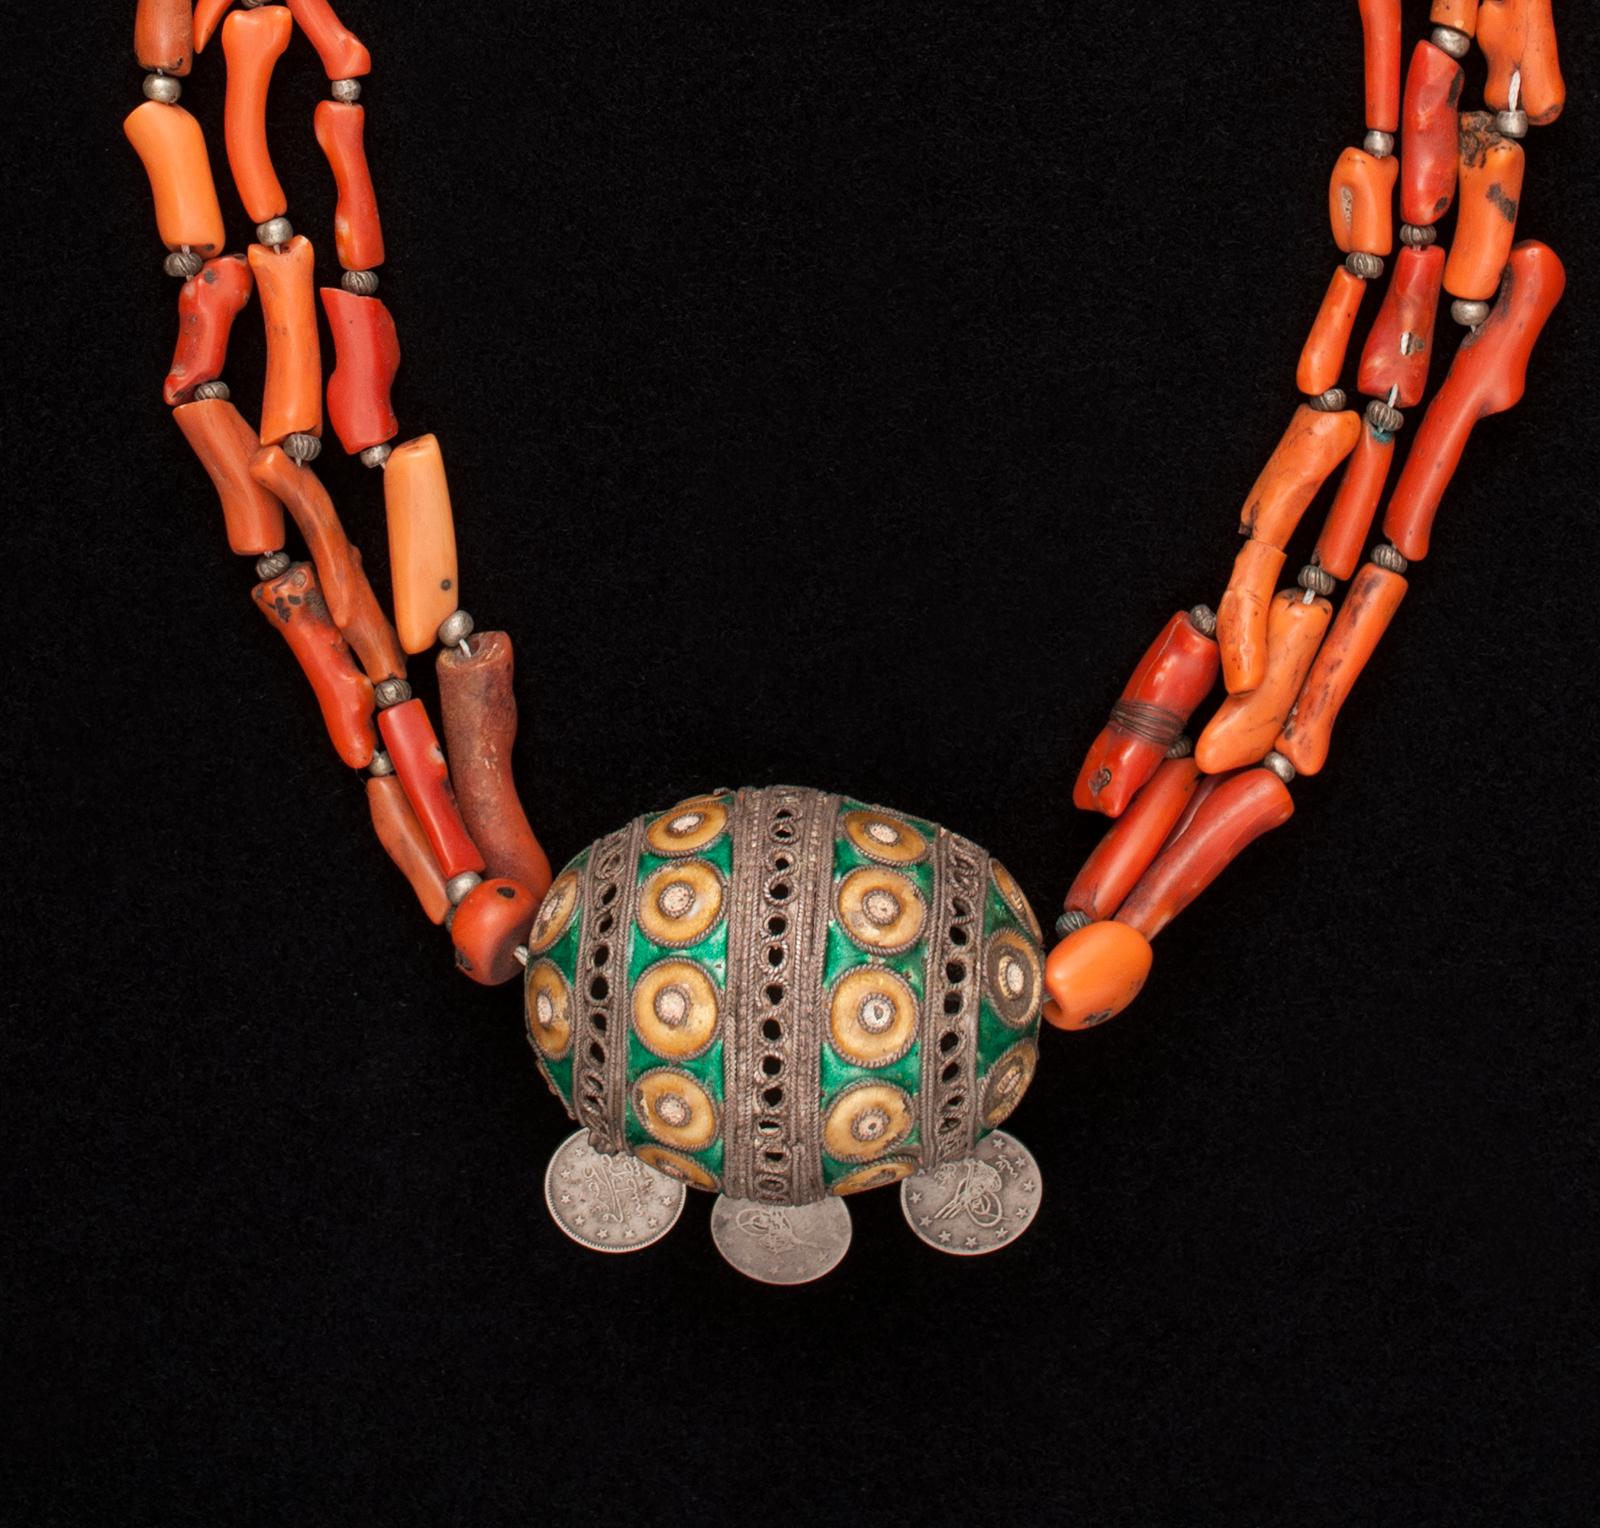 Early 20th century tribal coral pendant necklace, Anti Atlas Mountains, Morocco.

A three-strand antique coral necklace and enameled silver pendant with three hanging silver coins. It measures 28